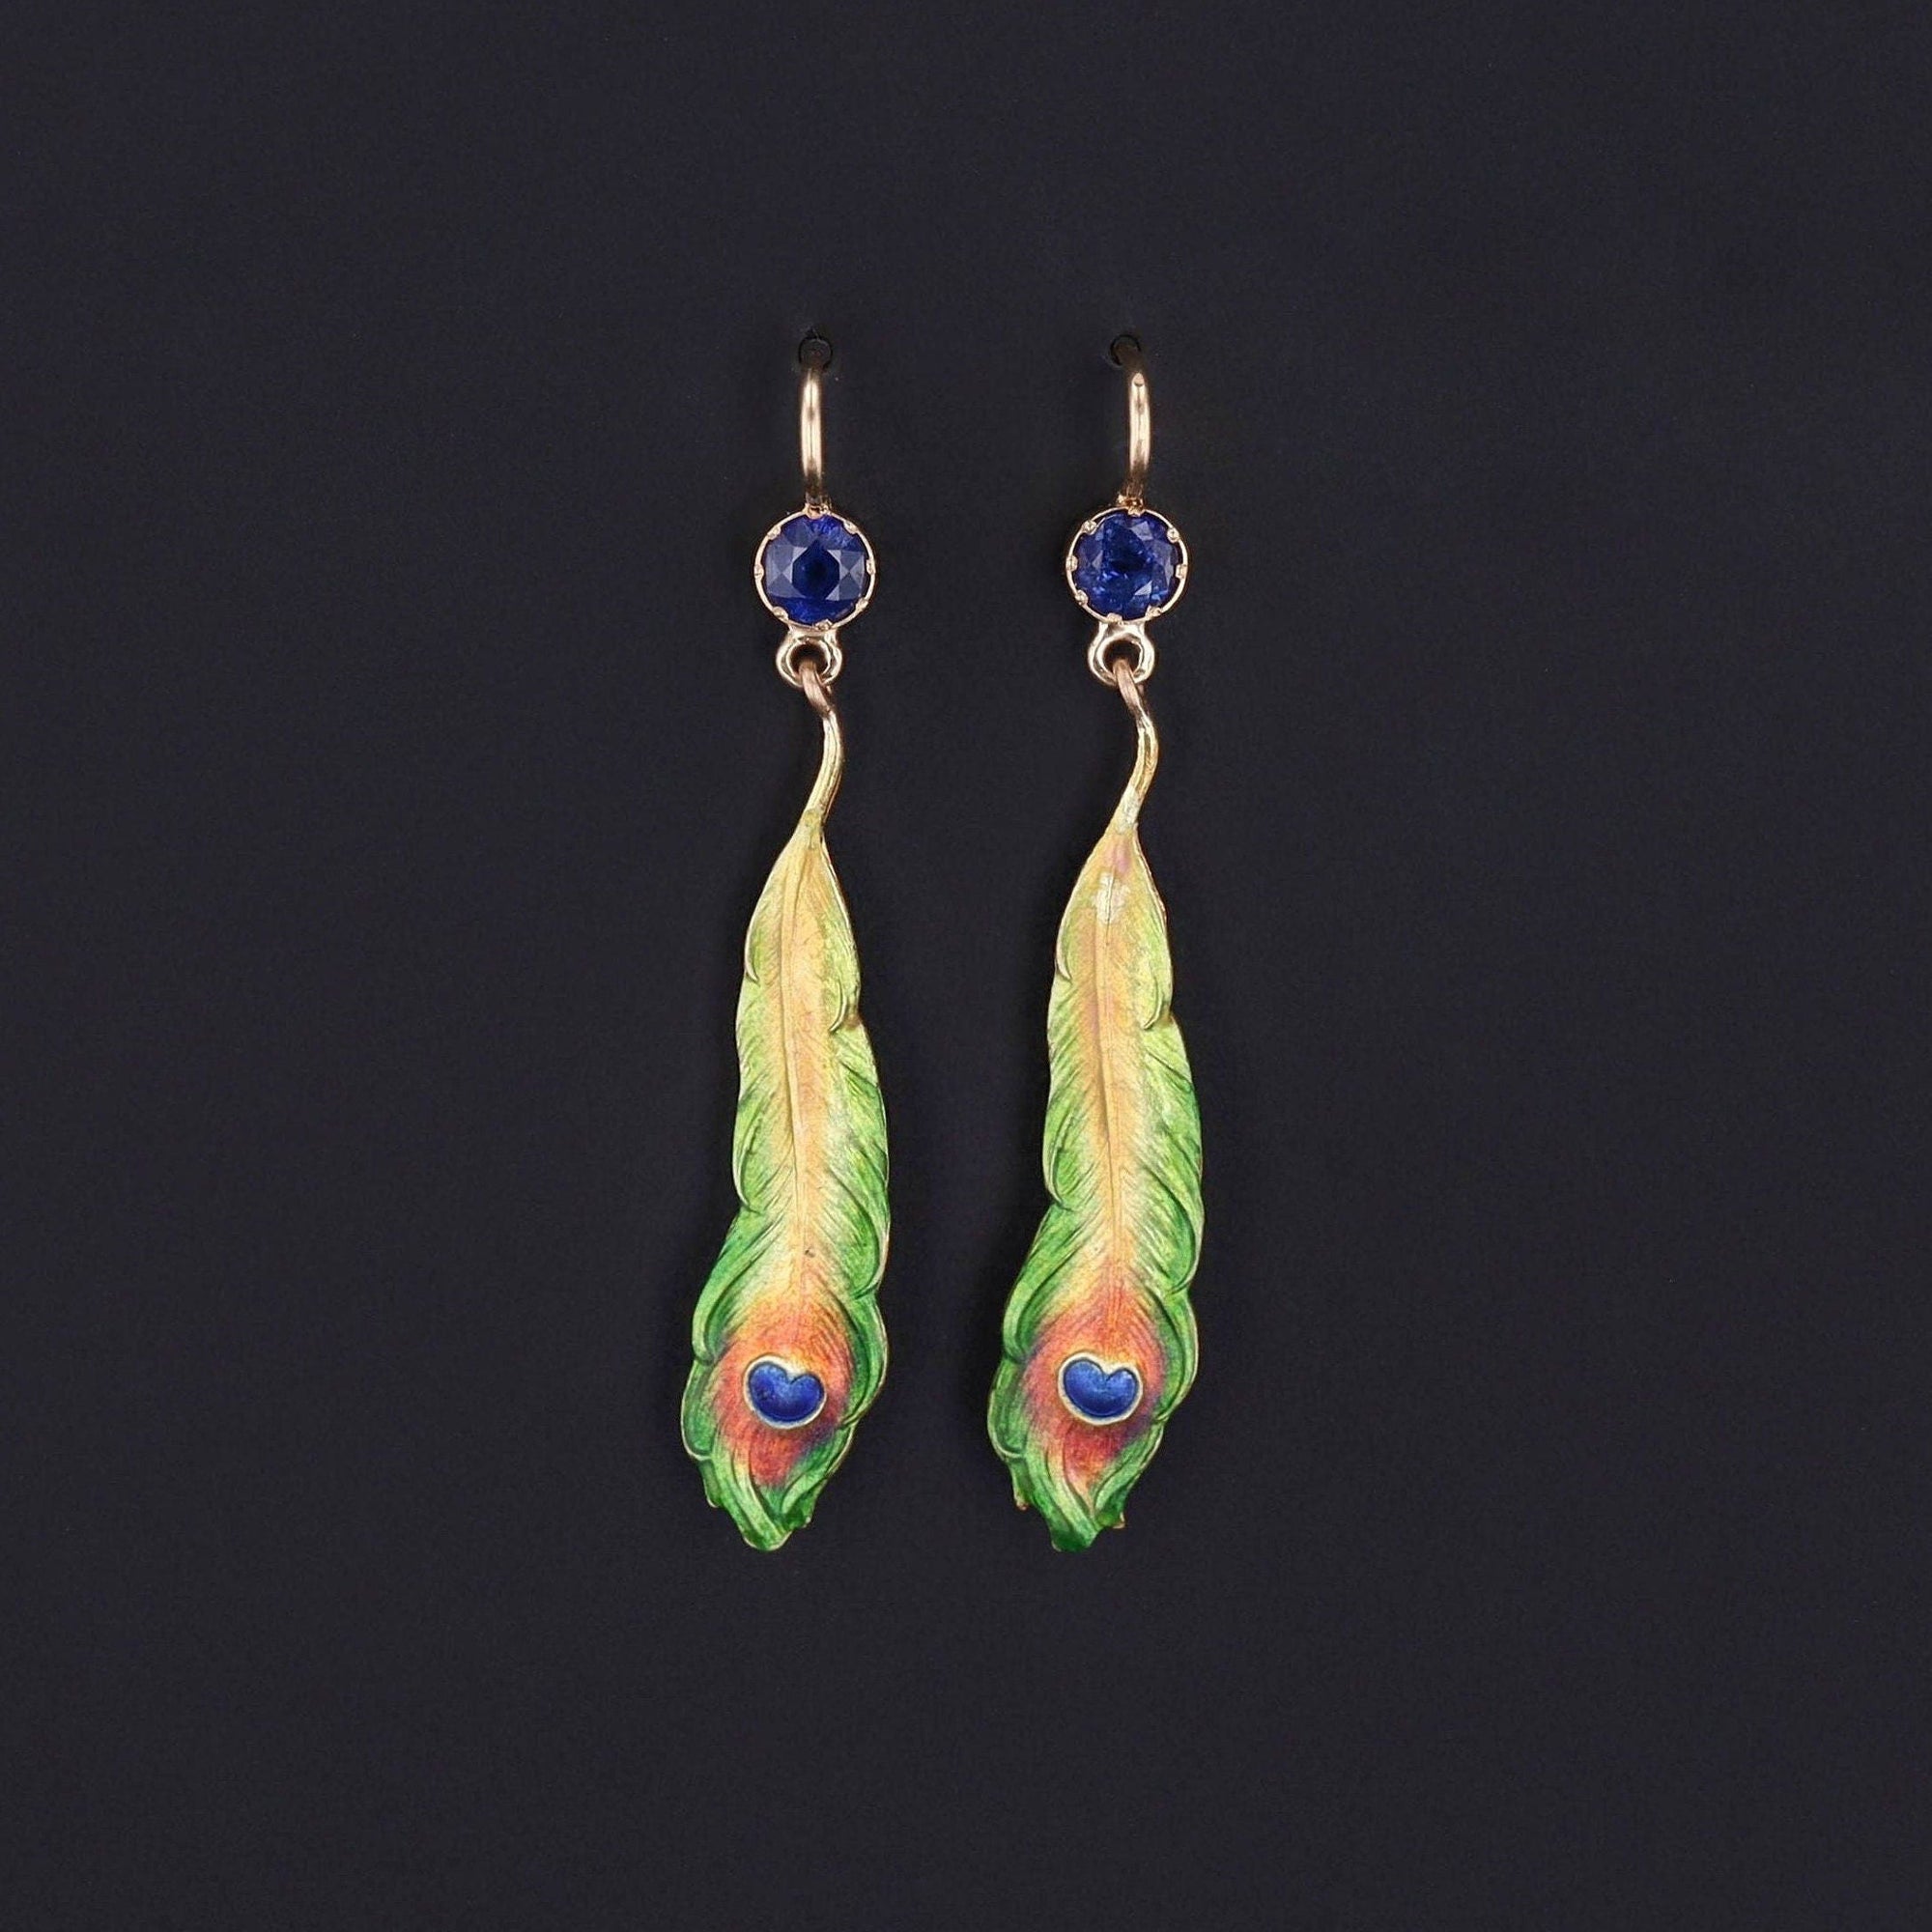 Antique Enamel Peacock Feather and Sapphire Conversion Earrings of 14k Gold